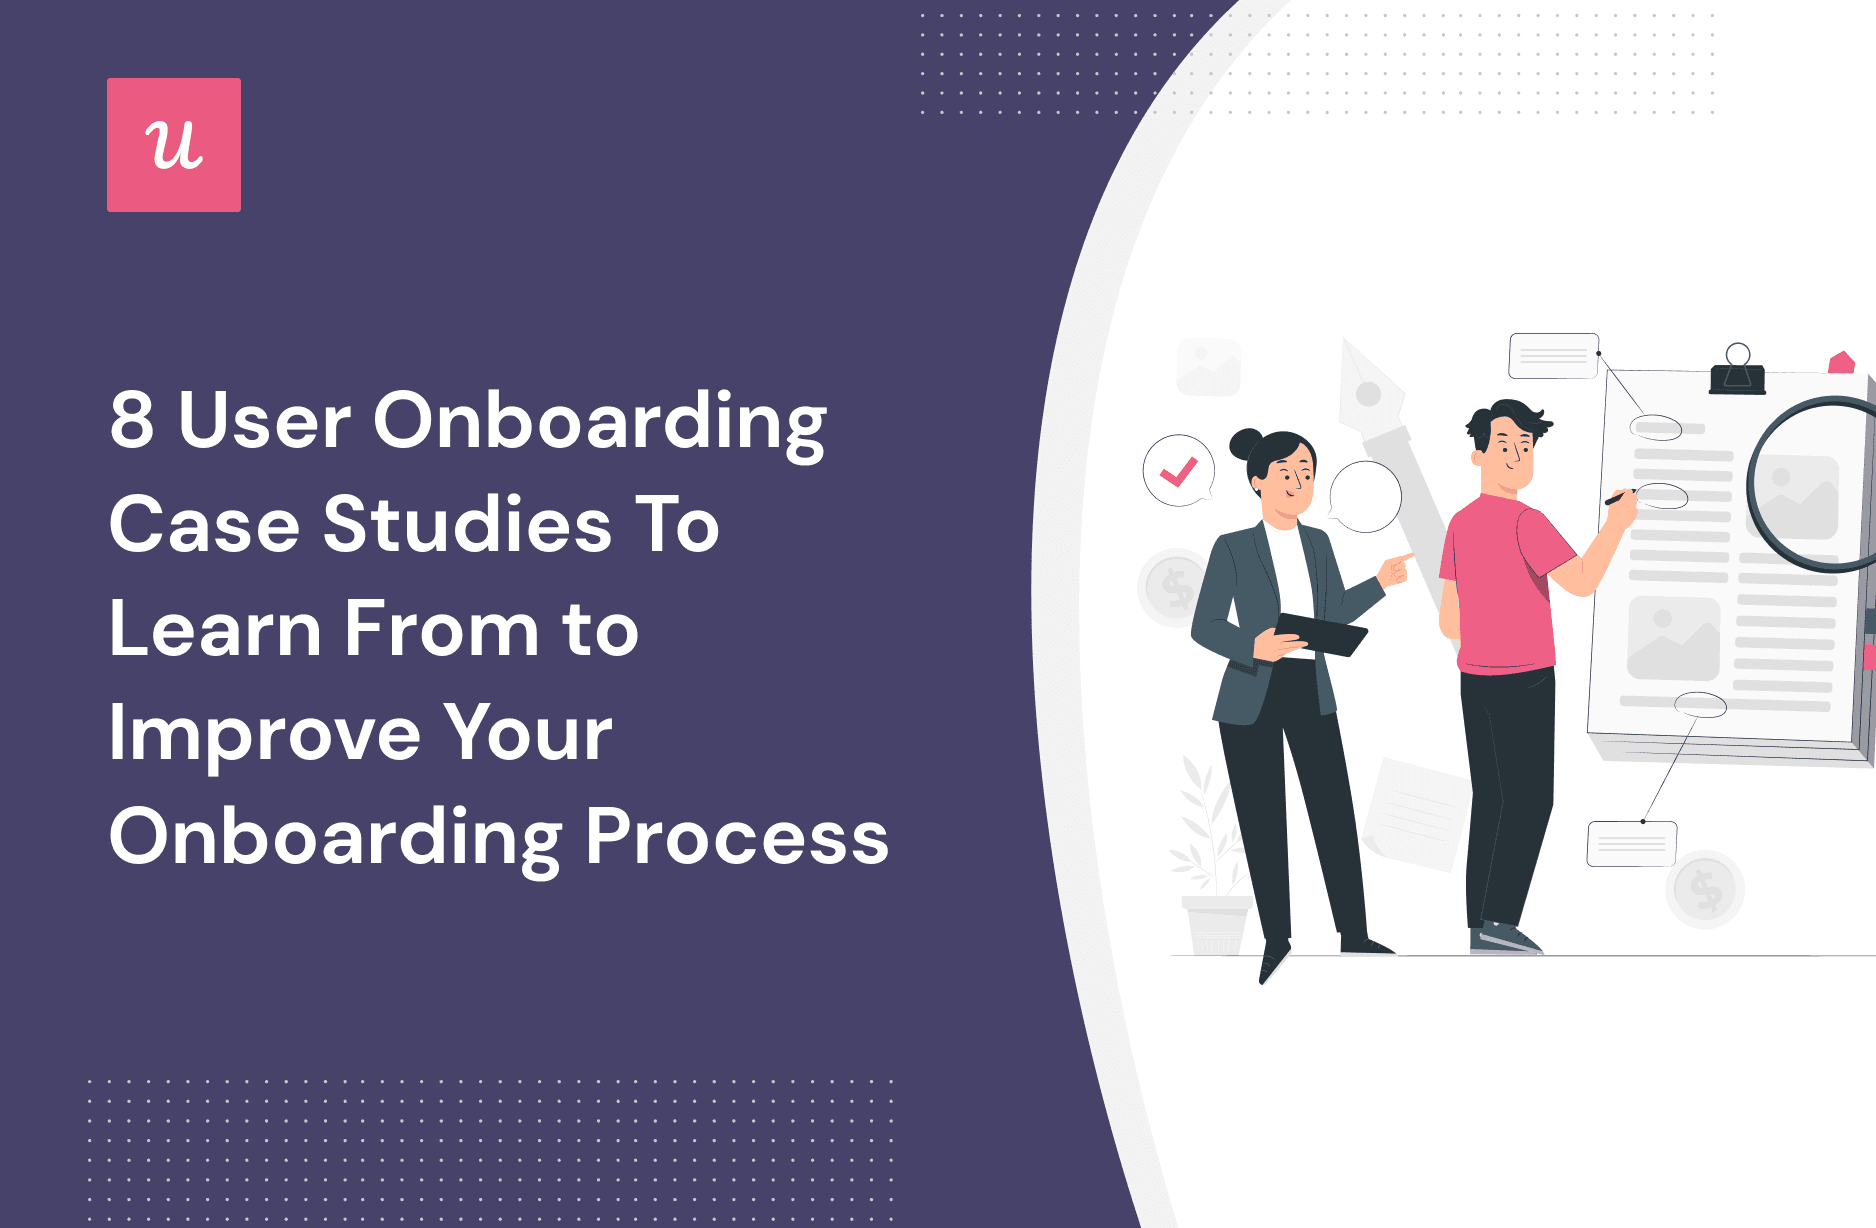 8 User Onboarding Case Studies to Learn From to Improve Your Onboarding Process cover